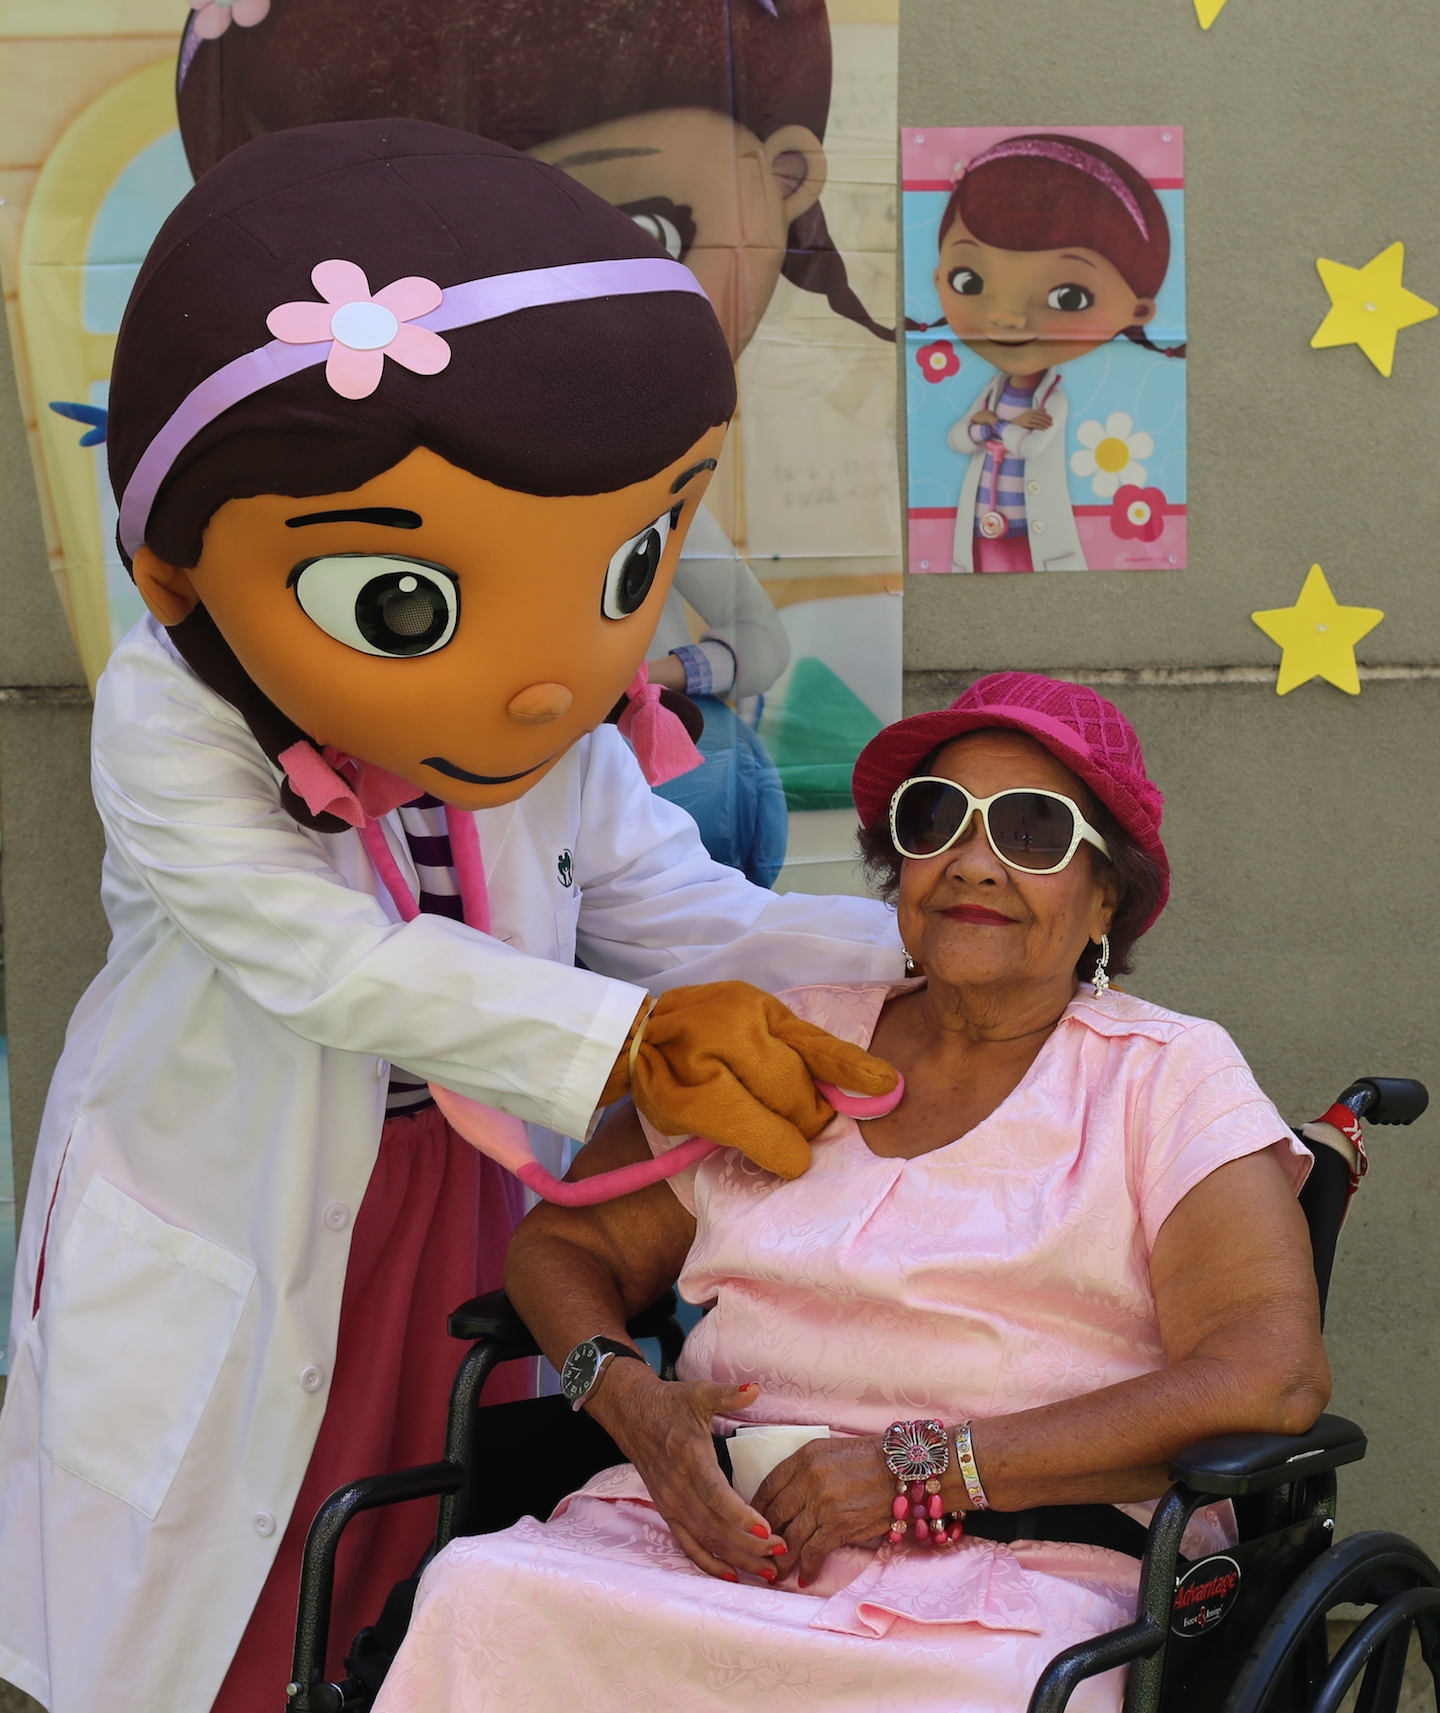 A costumed "doctor" uses a stethoscope as an older patient in a wheelchair plays along.